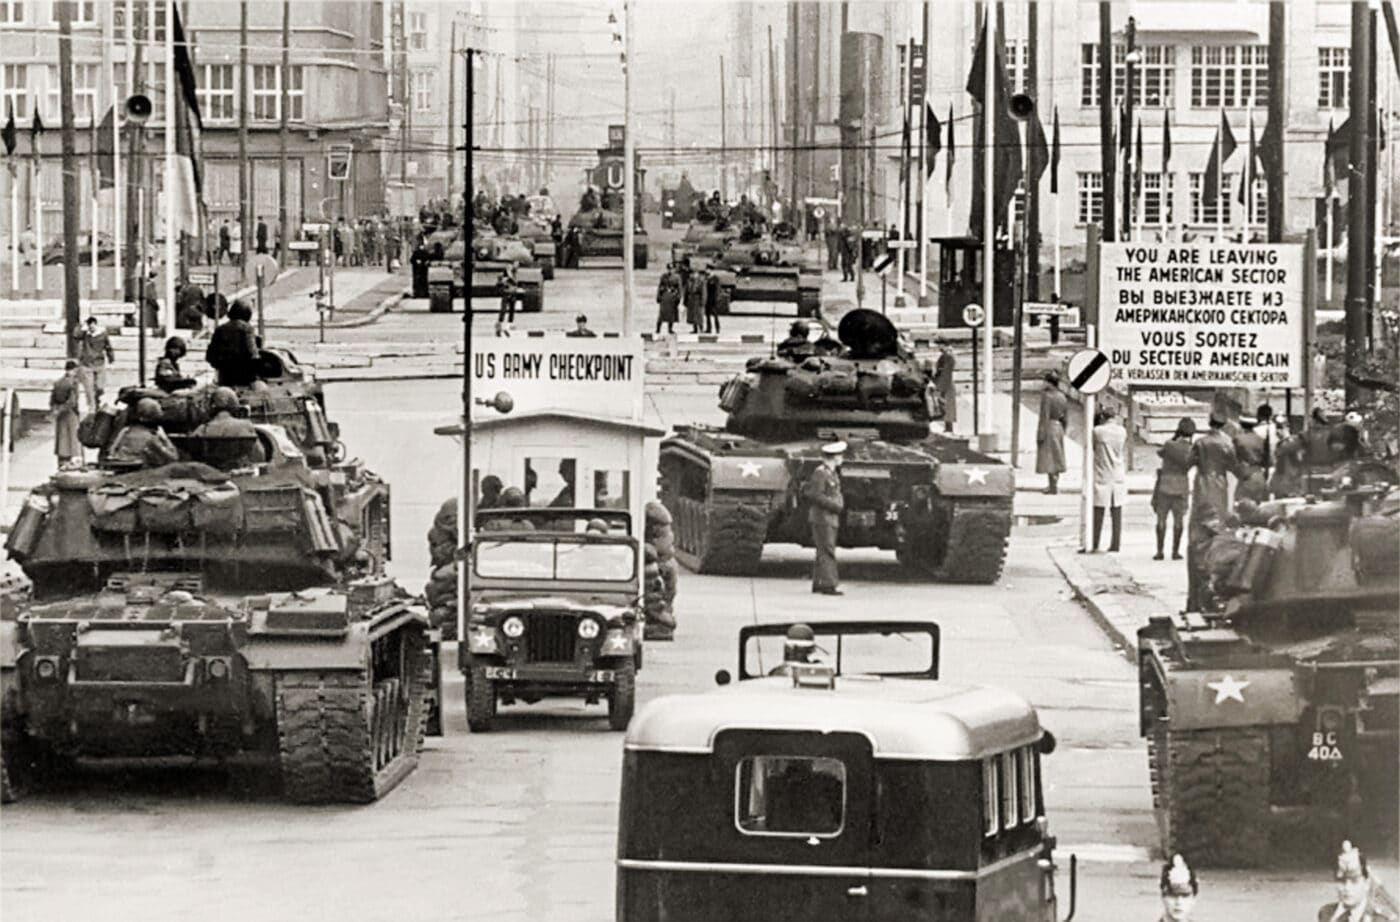 Checkpoint Charlie (Checkpoint C) crossing point between East and West Berlin during the Berlin Crisis of 1961